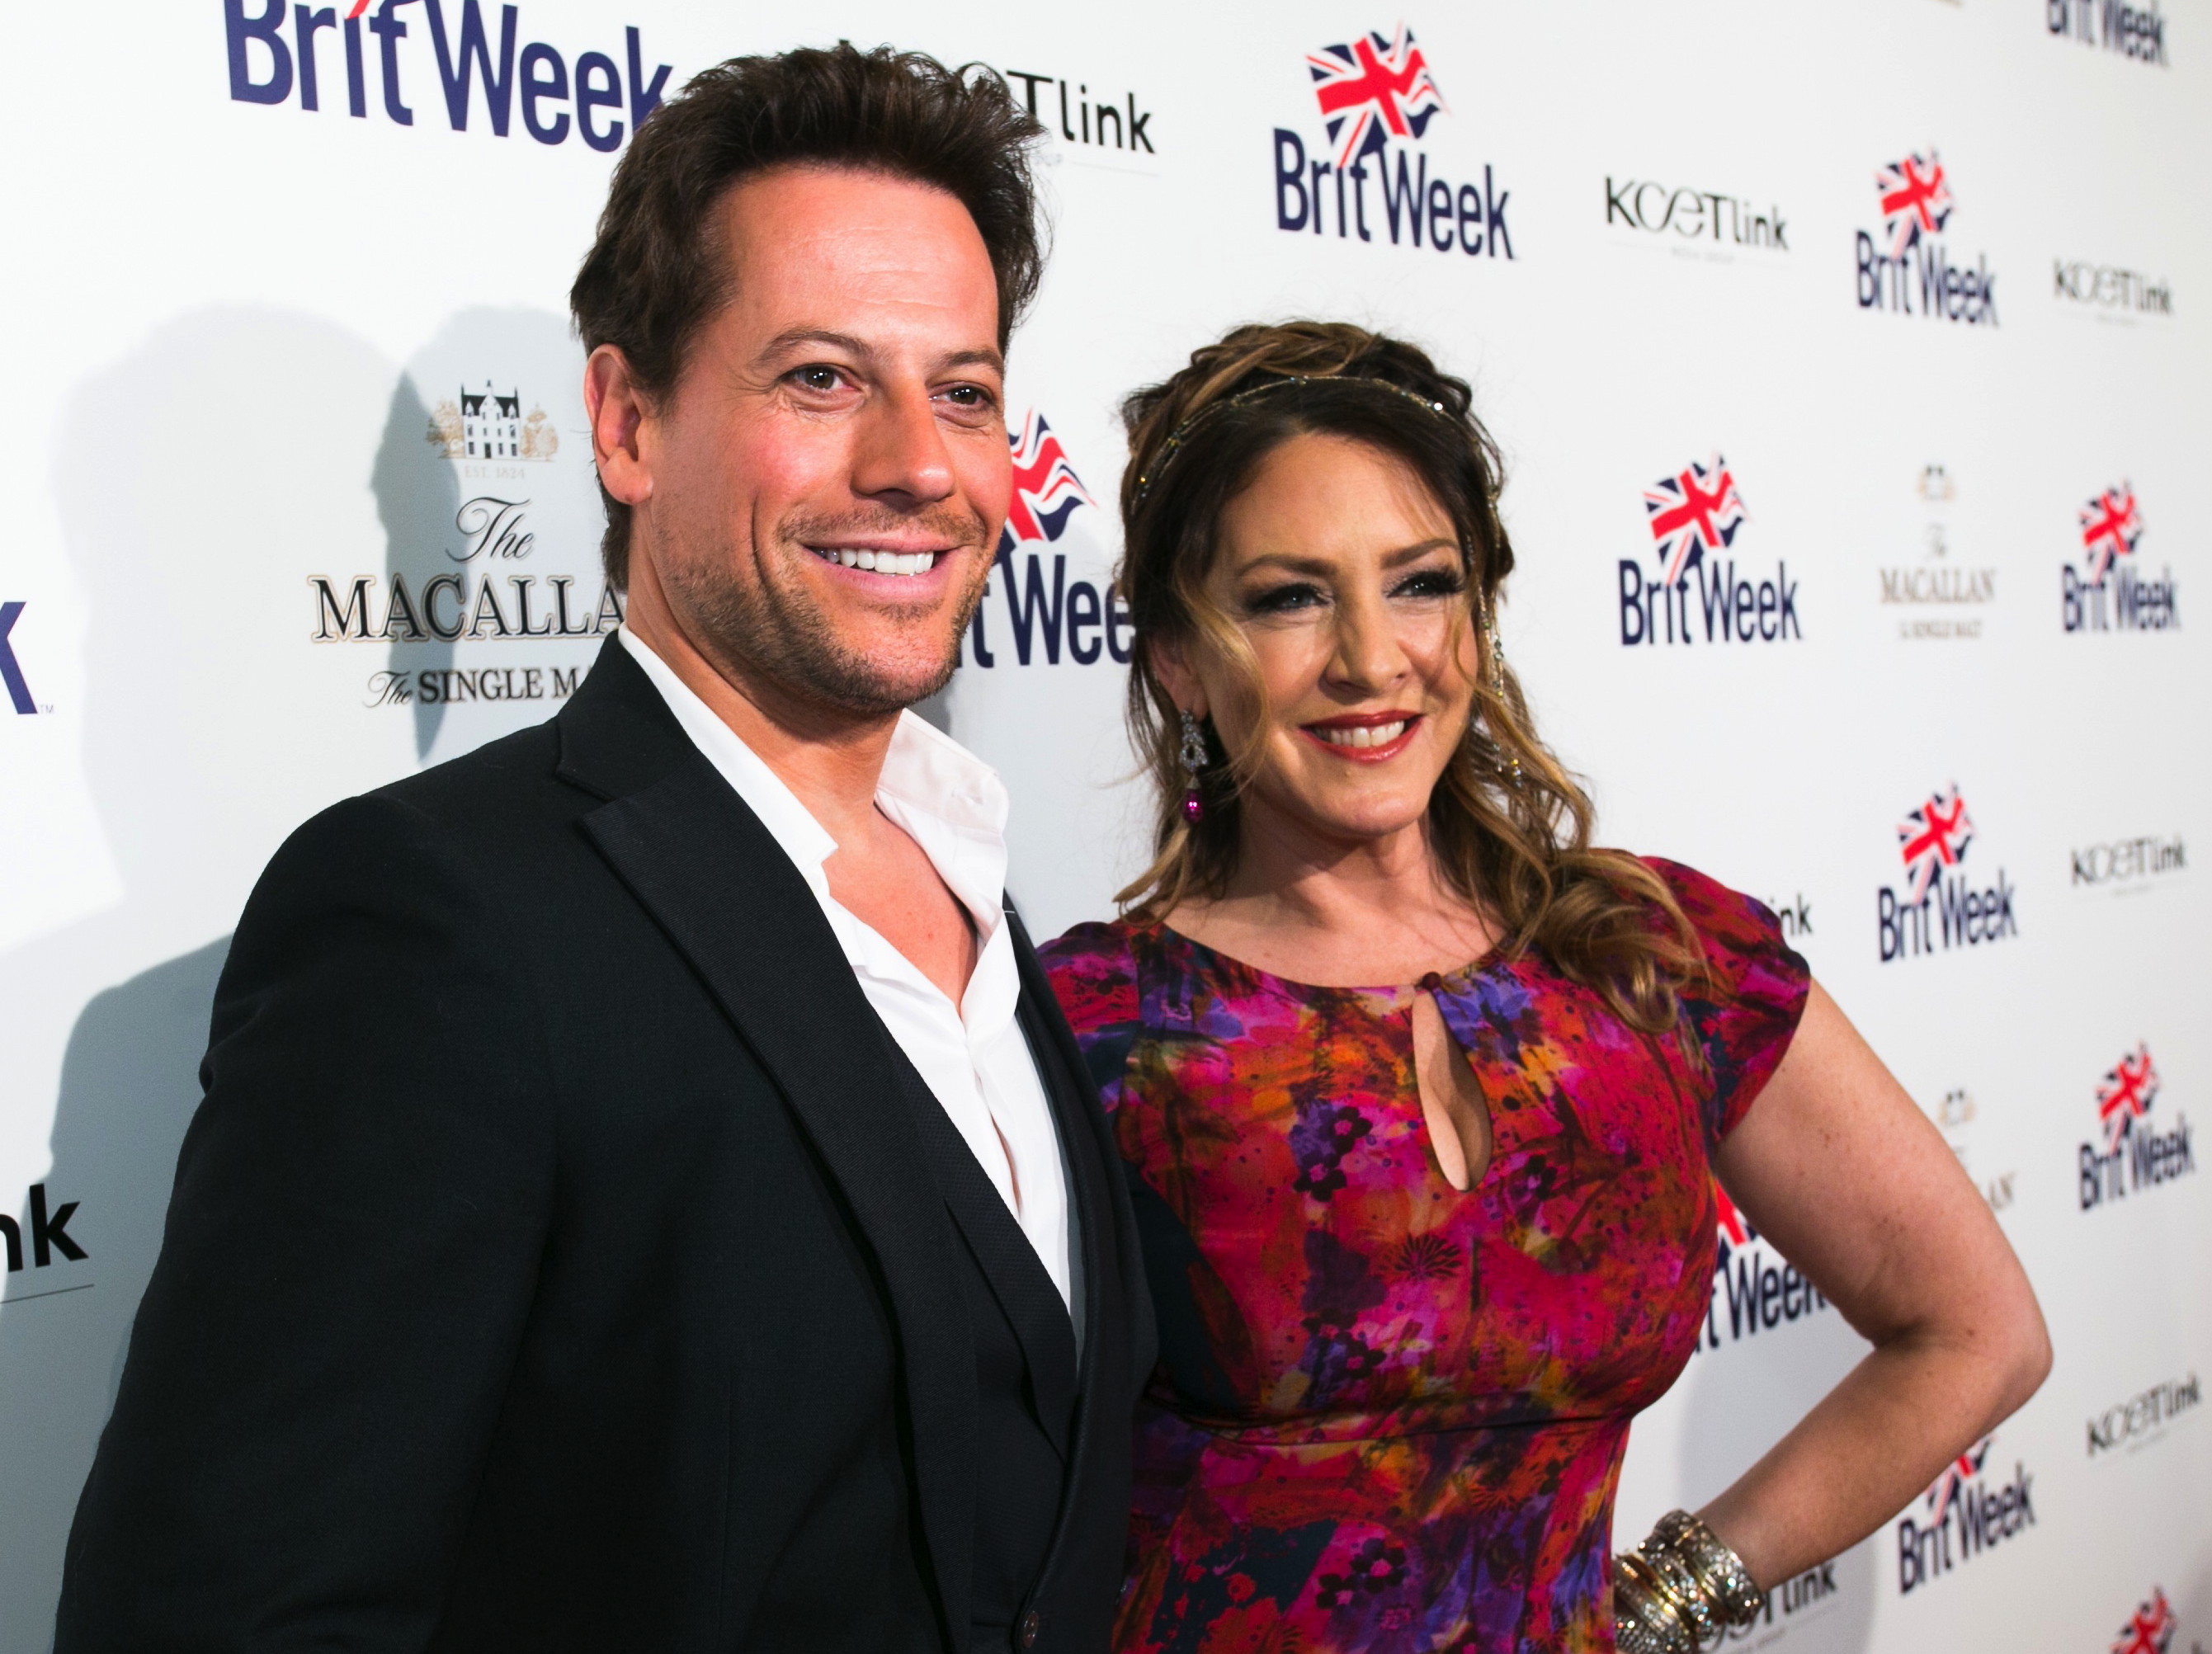 Ioan Gruffudd and Joely Fisher at BritWeek’s 10th anniversary performance of “MURDER, LUST & MADNESS” Images by Rex Gelert.